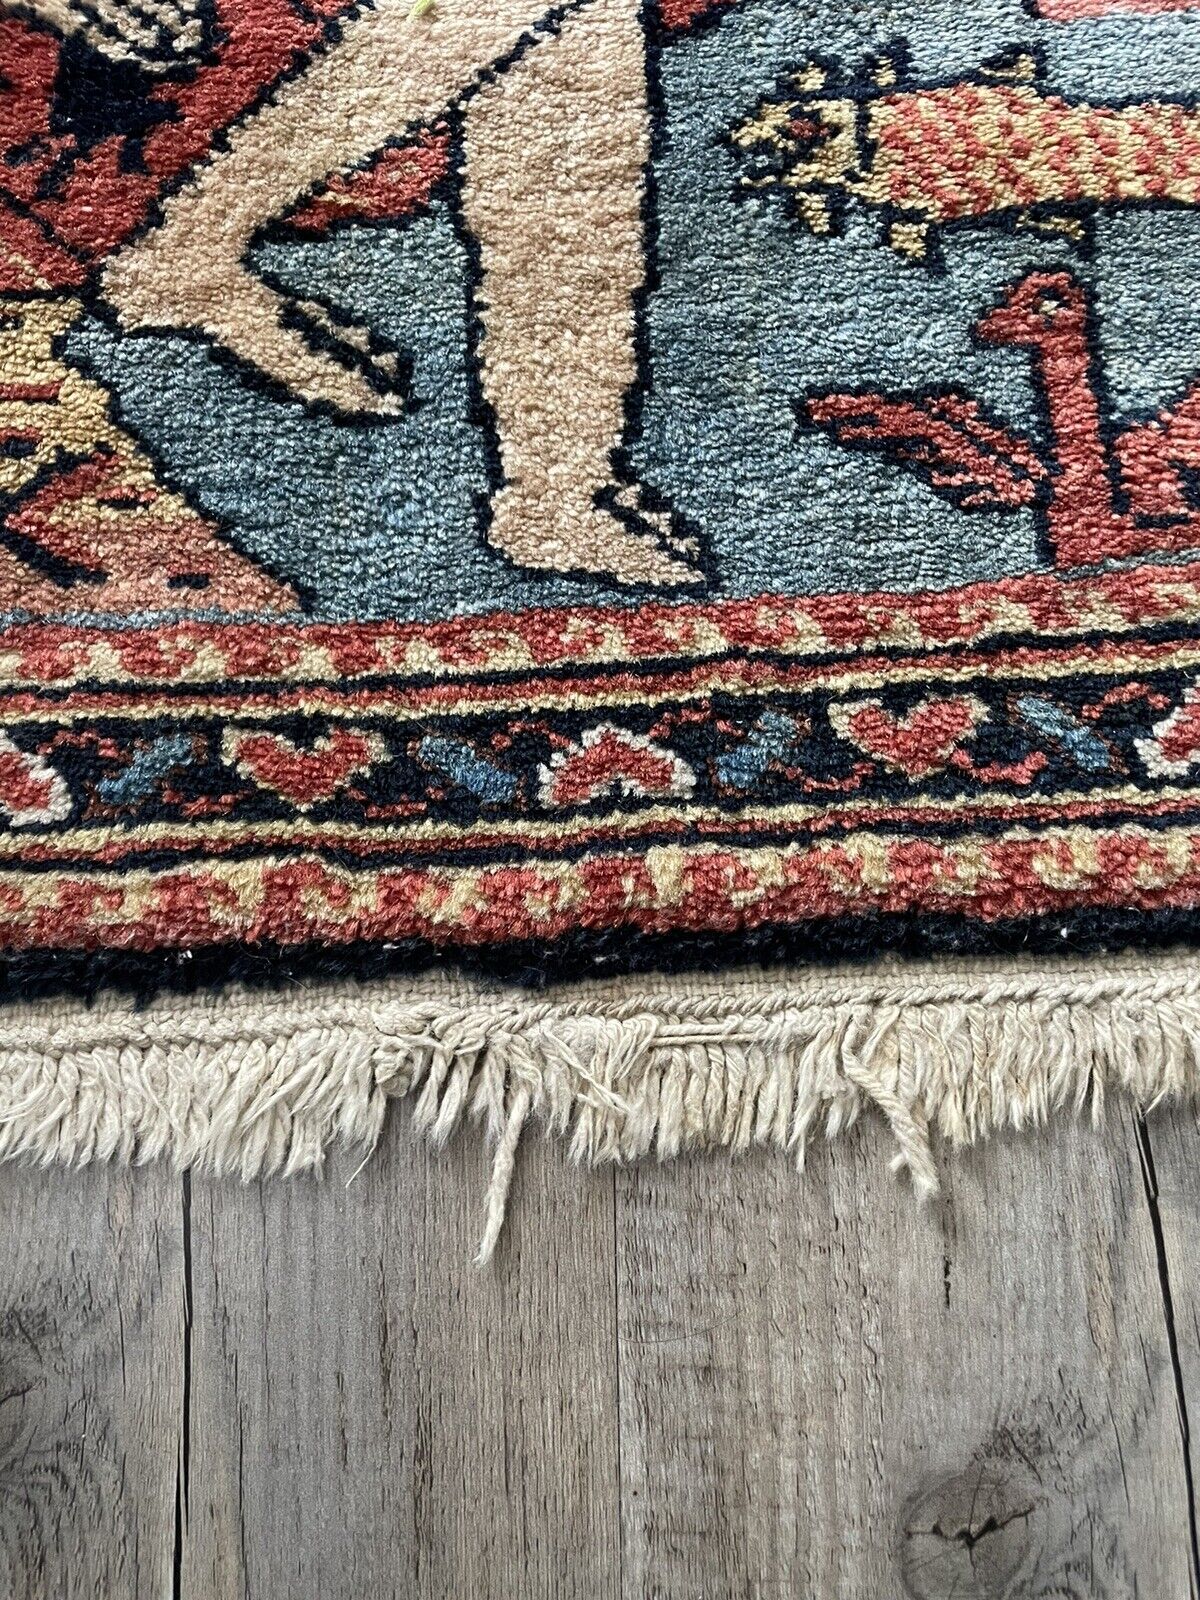 Close-up of artistic addition on Handmade Antique Persian Lilihan Collectible Rug - Detailed view highlighting the rug's role as an artistic addition that enhances any decor.